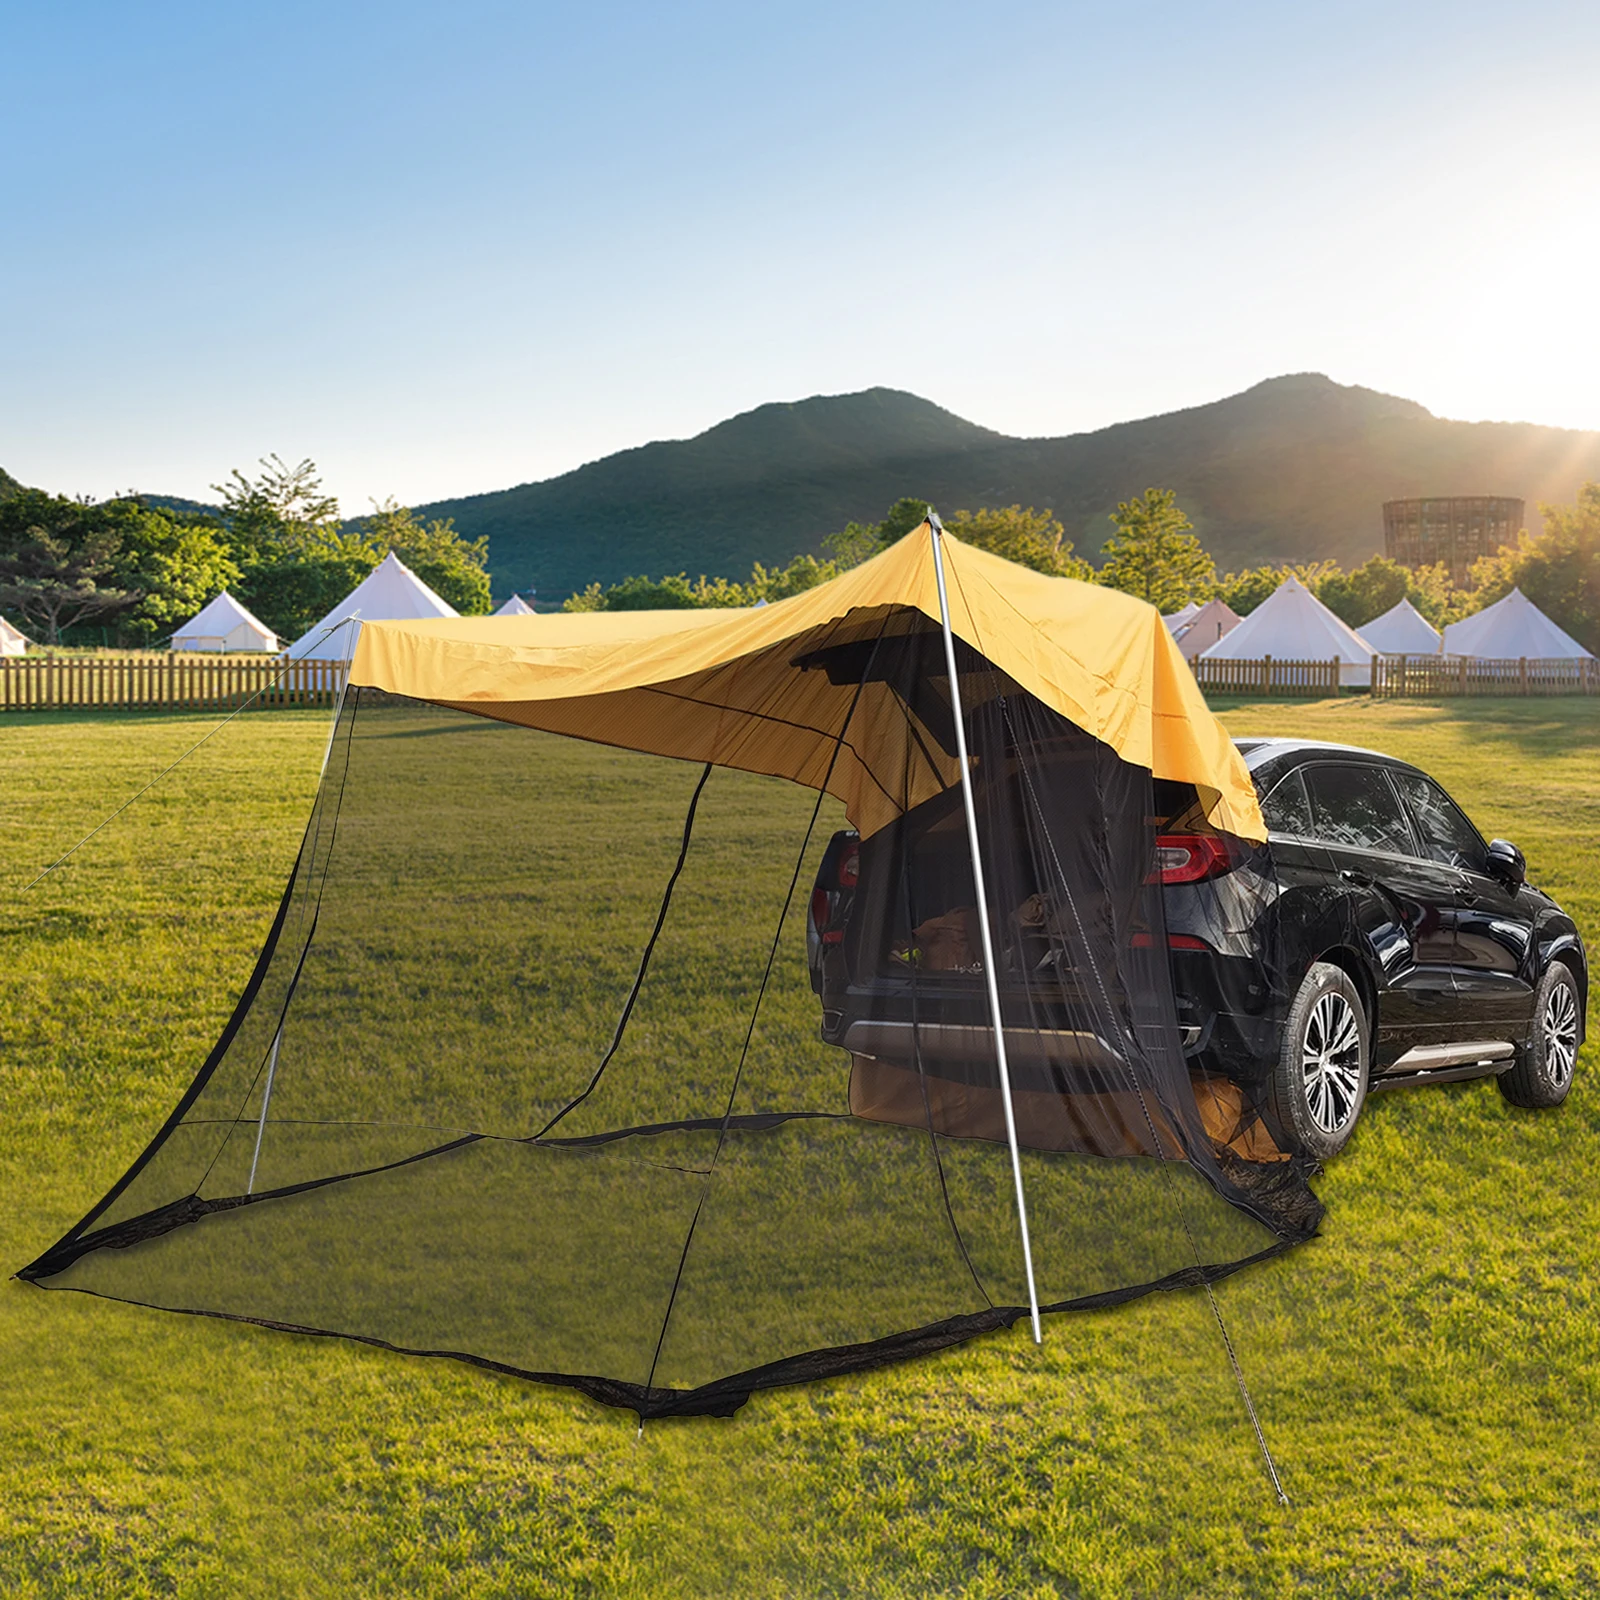 

Waterproof Roof Top Tent Car Canopy with a Mosquito Net for Outdoor Travel Family Picnics Camping 3-4 Persons Camping and Hiking